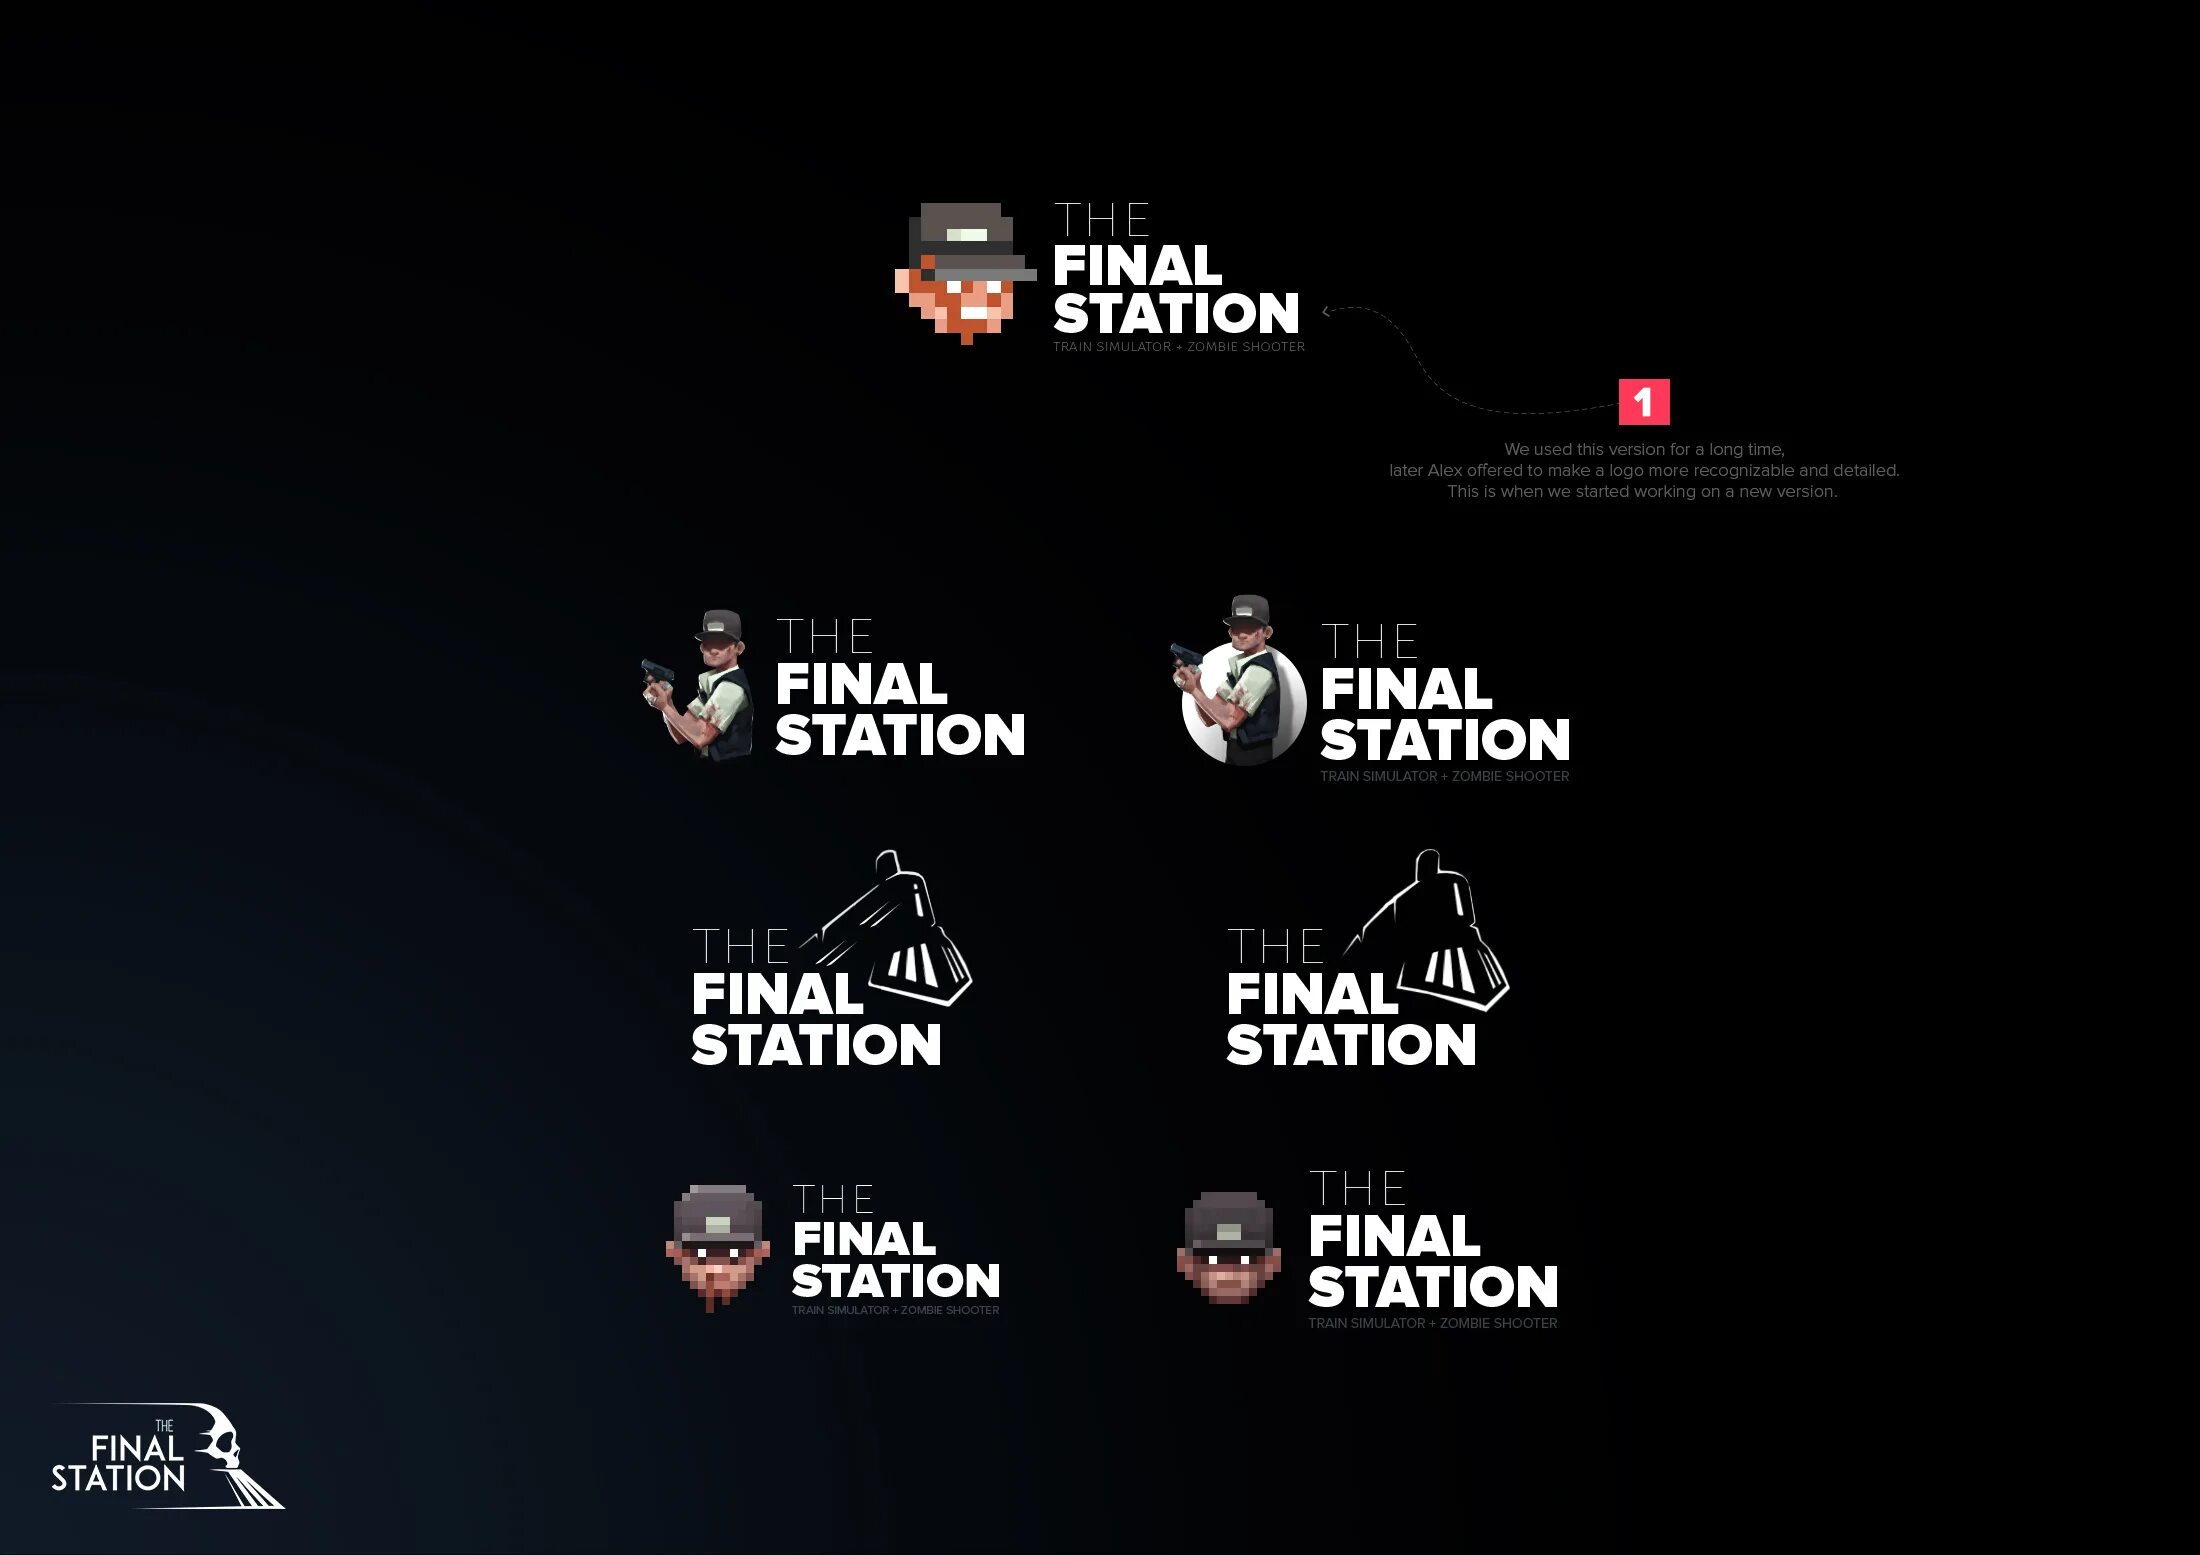 The finals коды. The Final Station. The Final Station артбук. The Final Station Страж. Final Station игра.